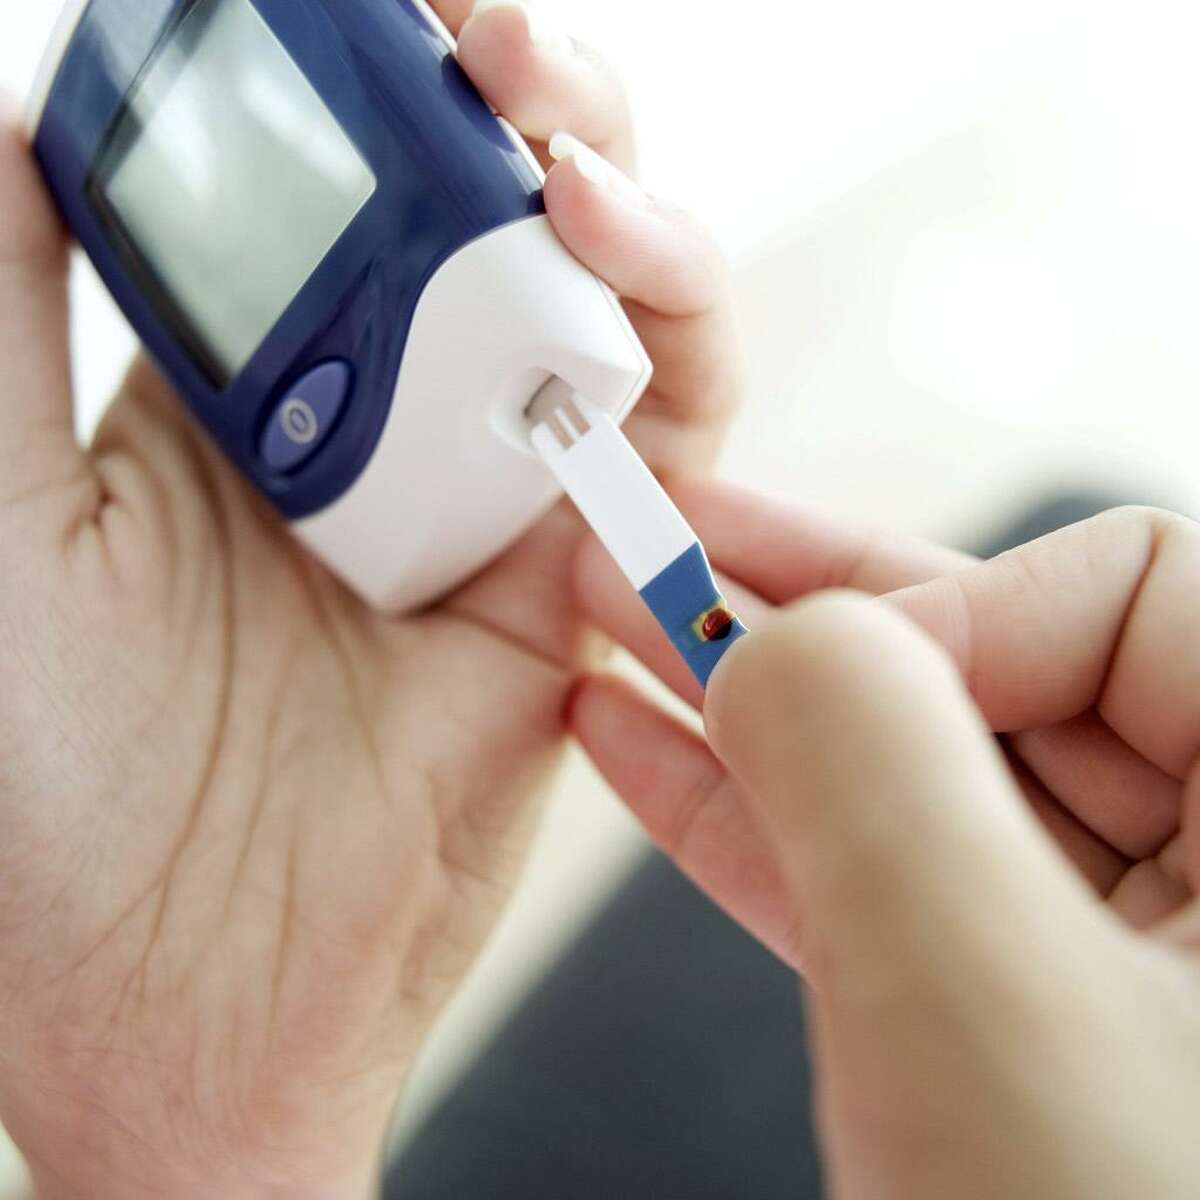 According to the American Diabetes Association, 7 million people with diabetes are undiagnosed, and one in three are at risk.